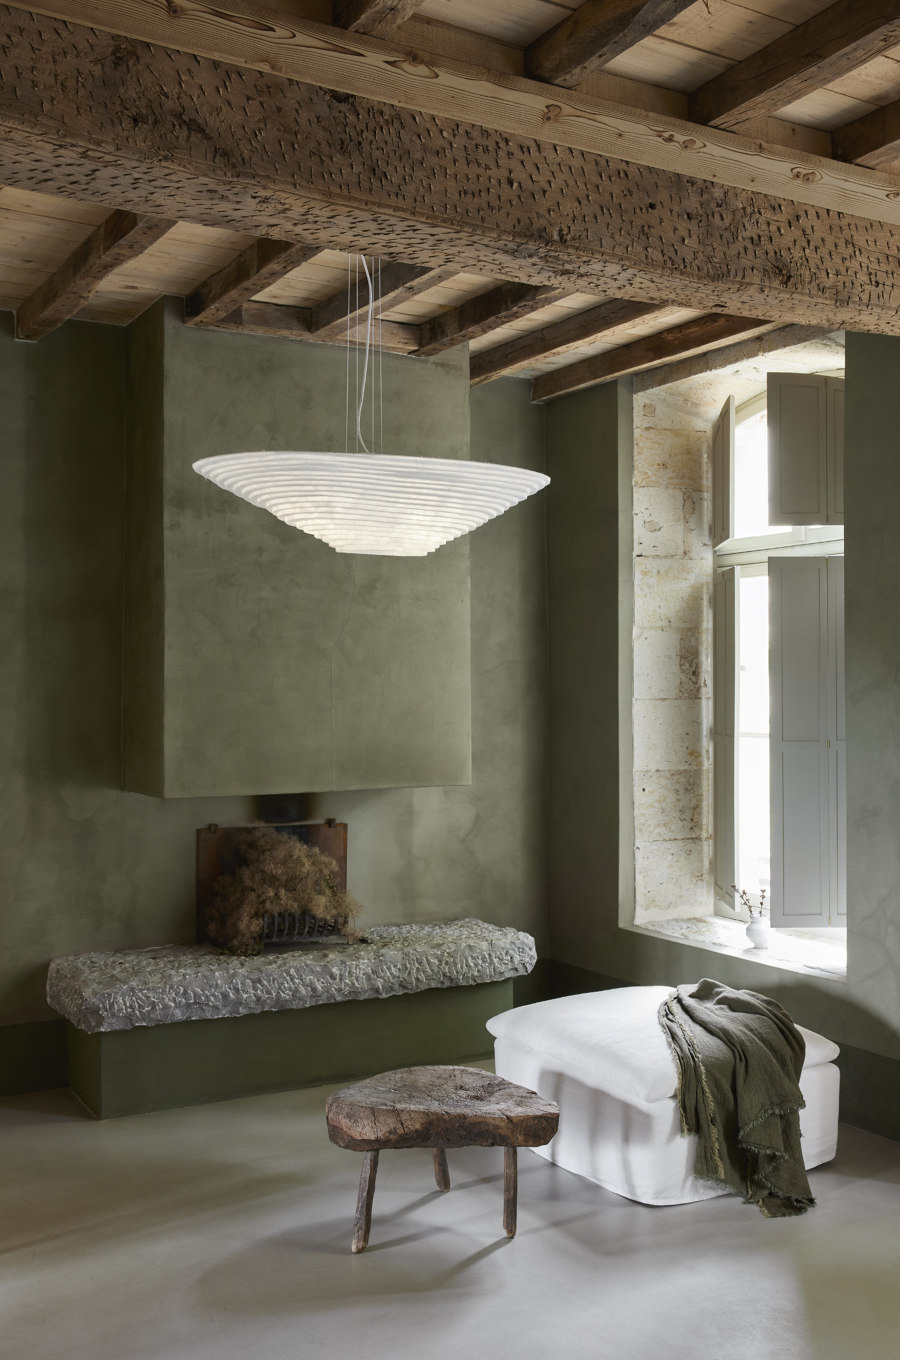 Nebulis by Forestier: new lighting from centuries-old materials | Novità